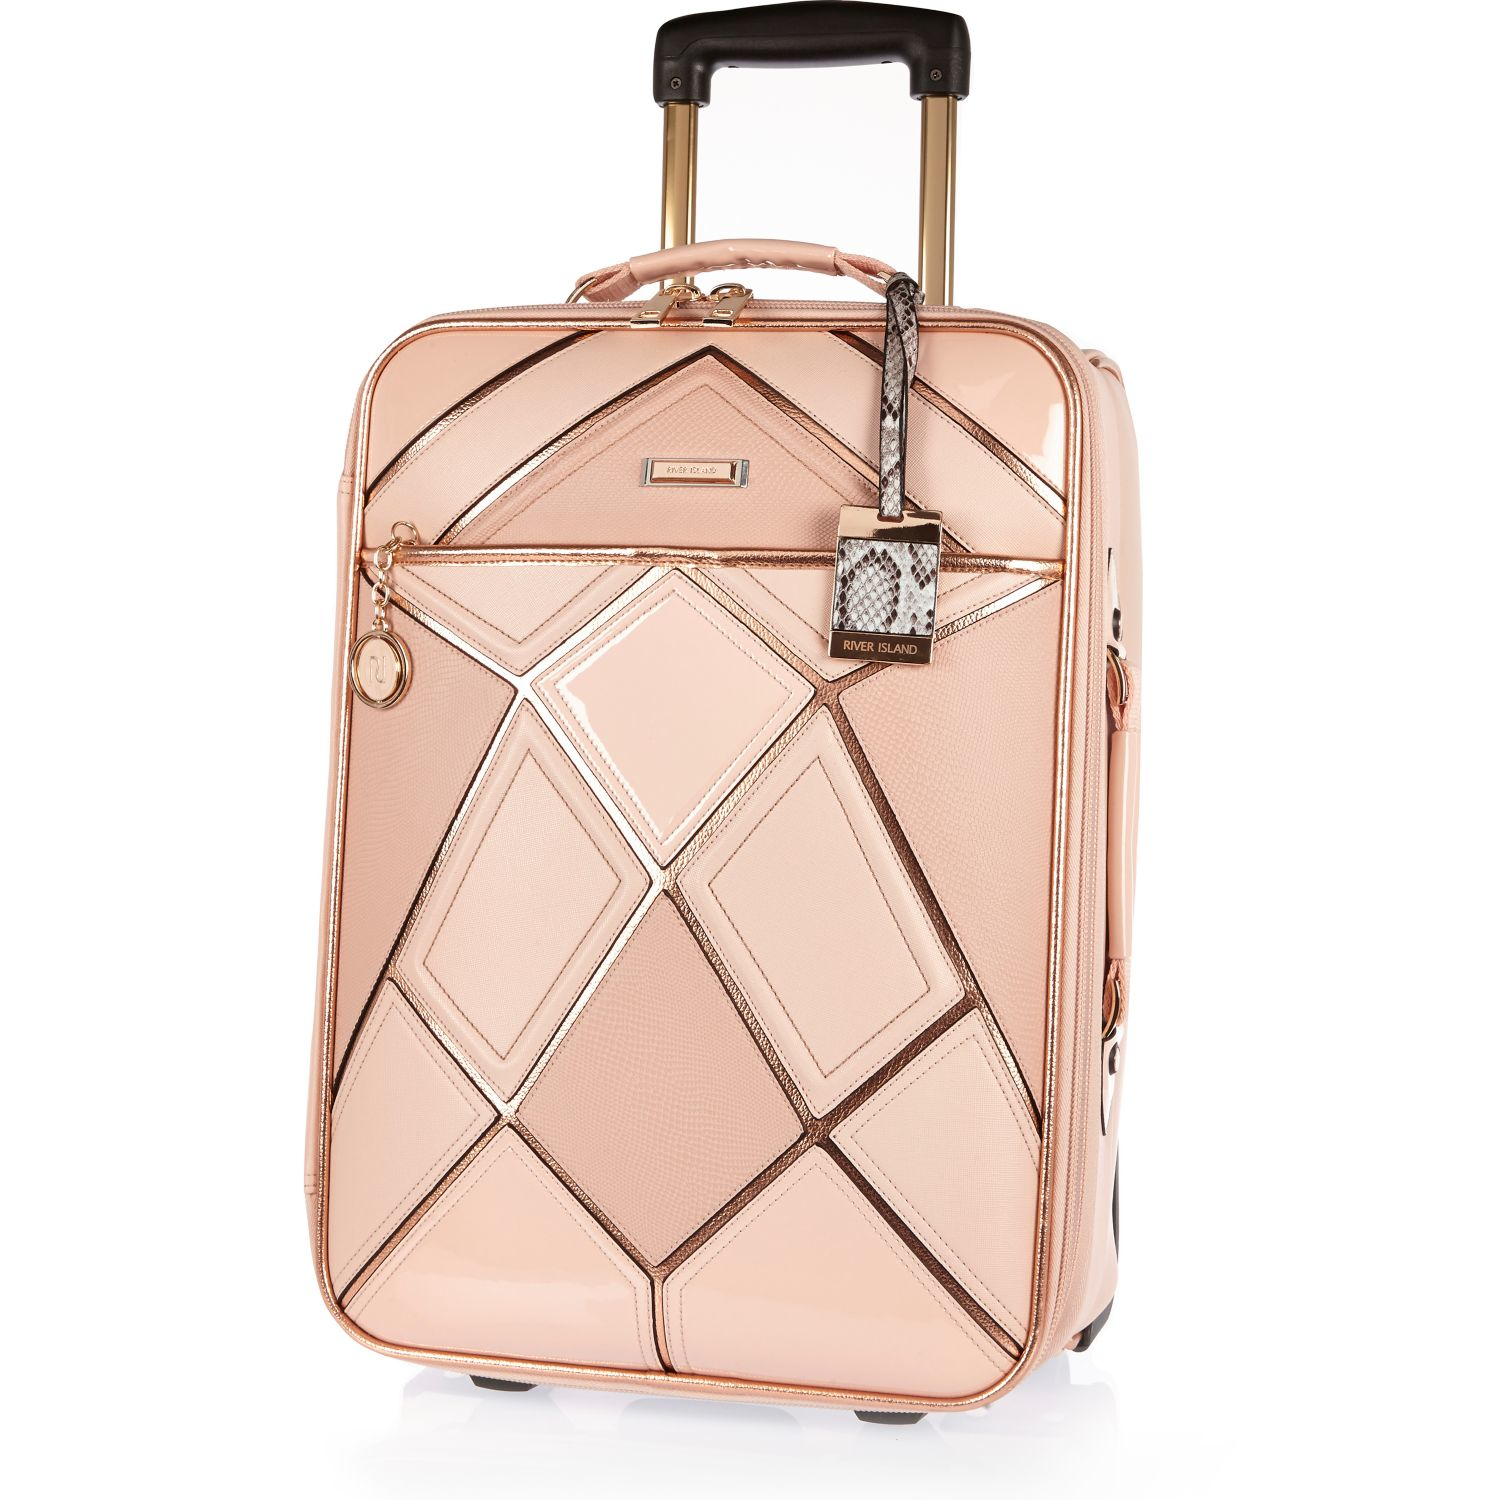 Lyst - River Island Pink Patchwork Suitcase in Pink